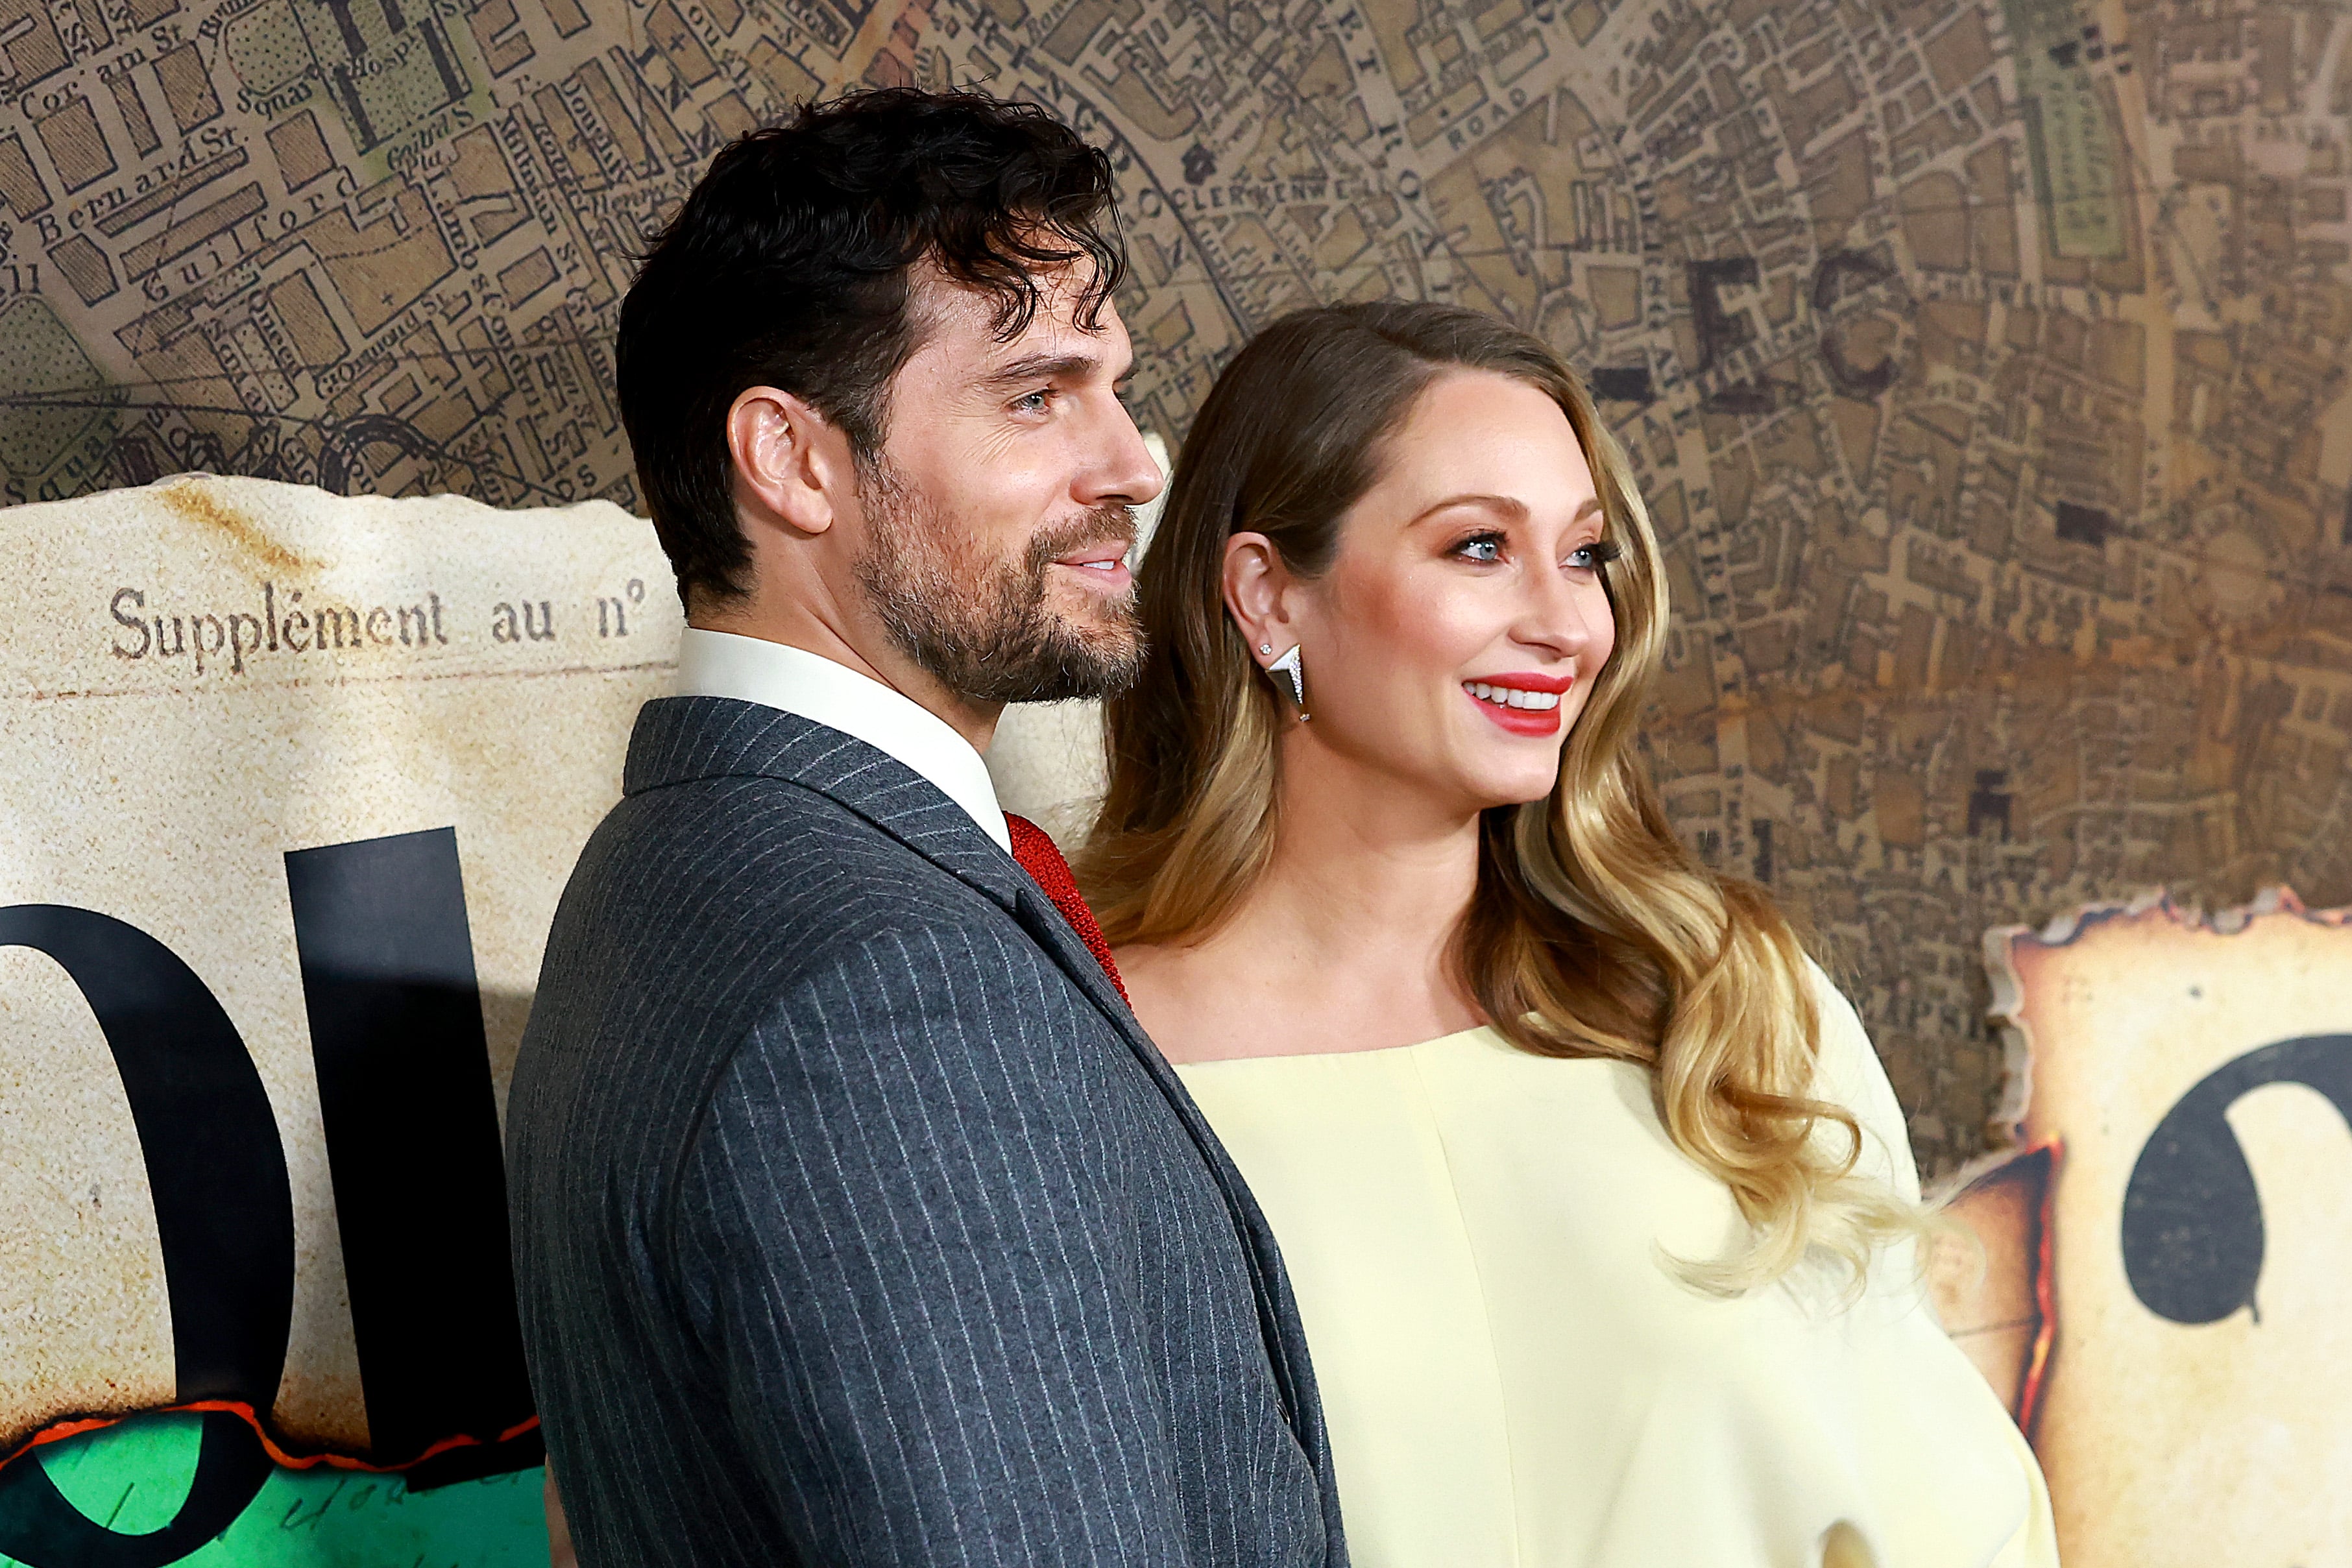 Henry Cavill and Natalie Viscuso Made Red Carpet Debut After Trolling